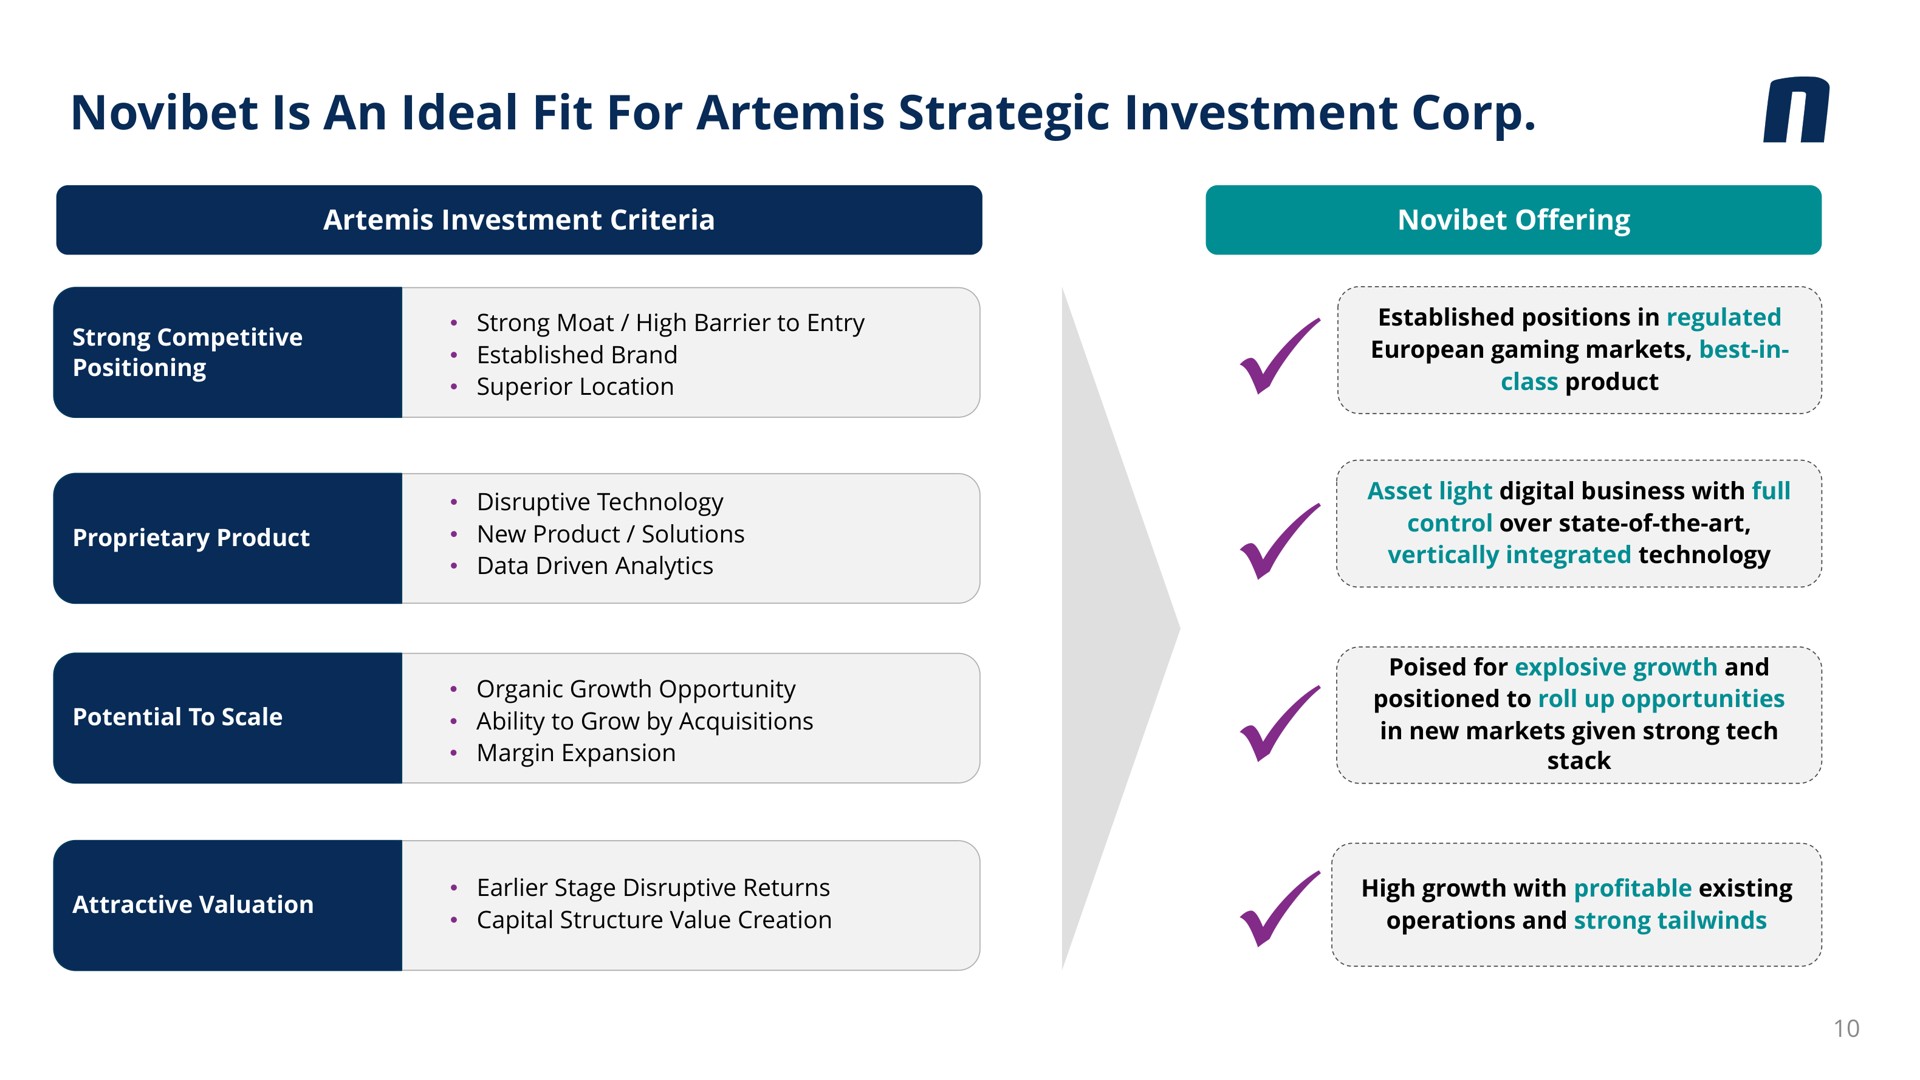 is an ideal fit for strategic investment corp | Novibet